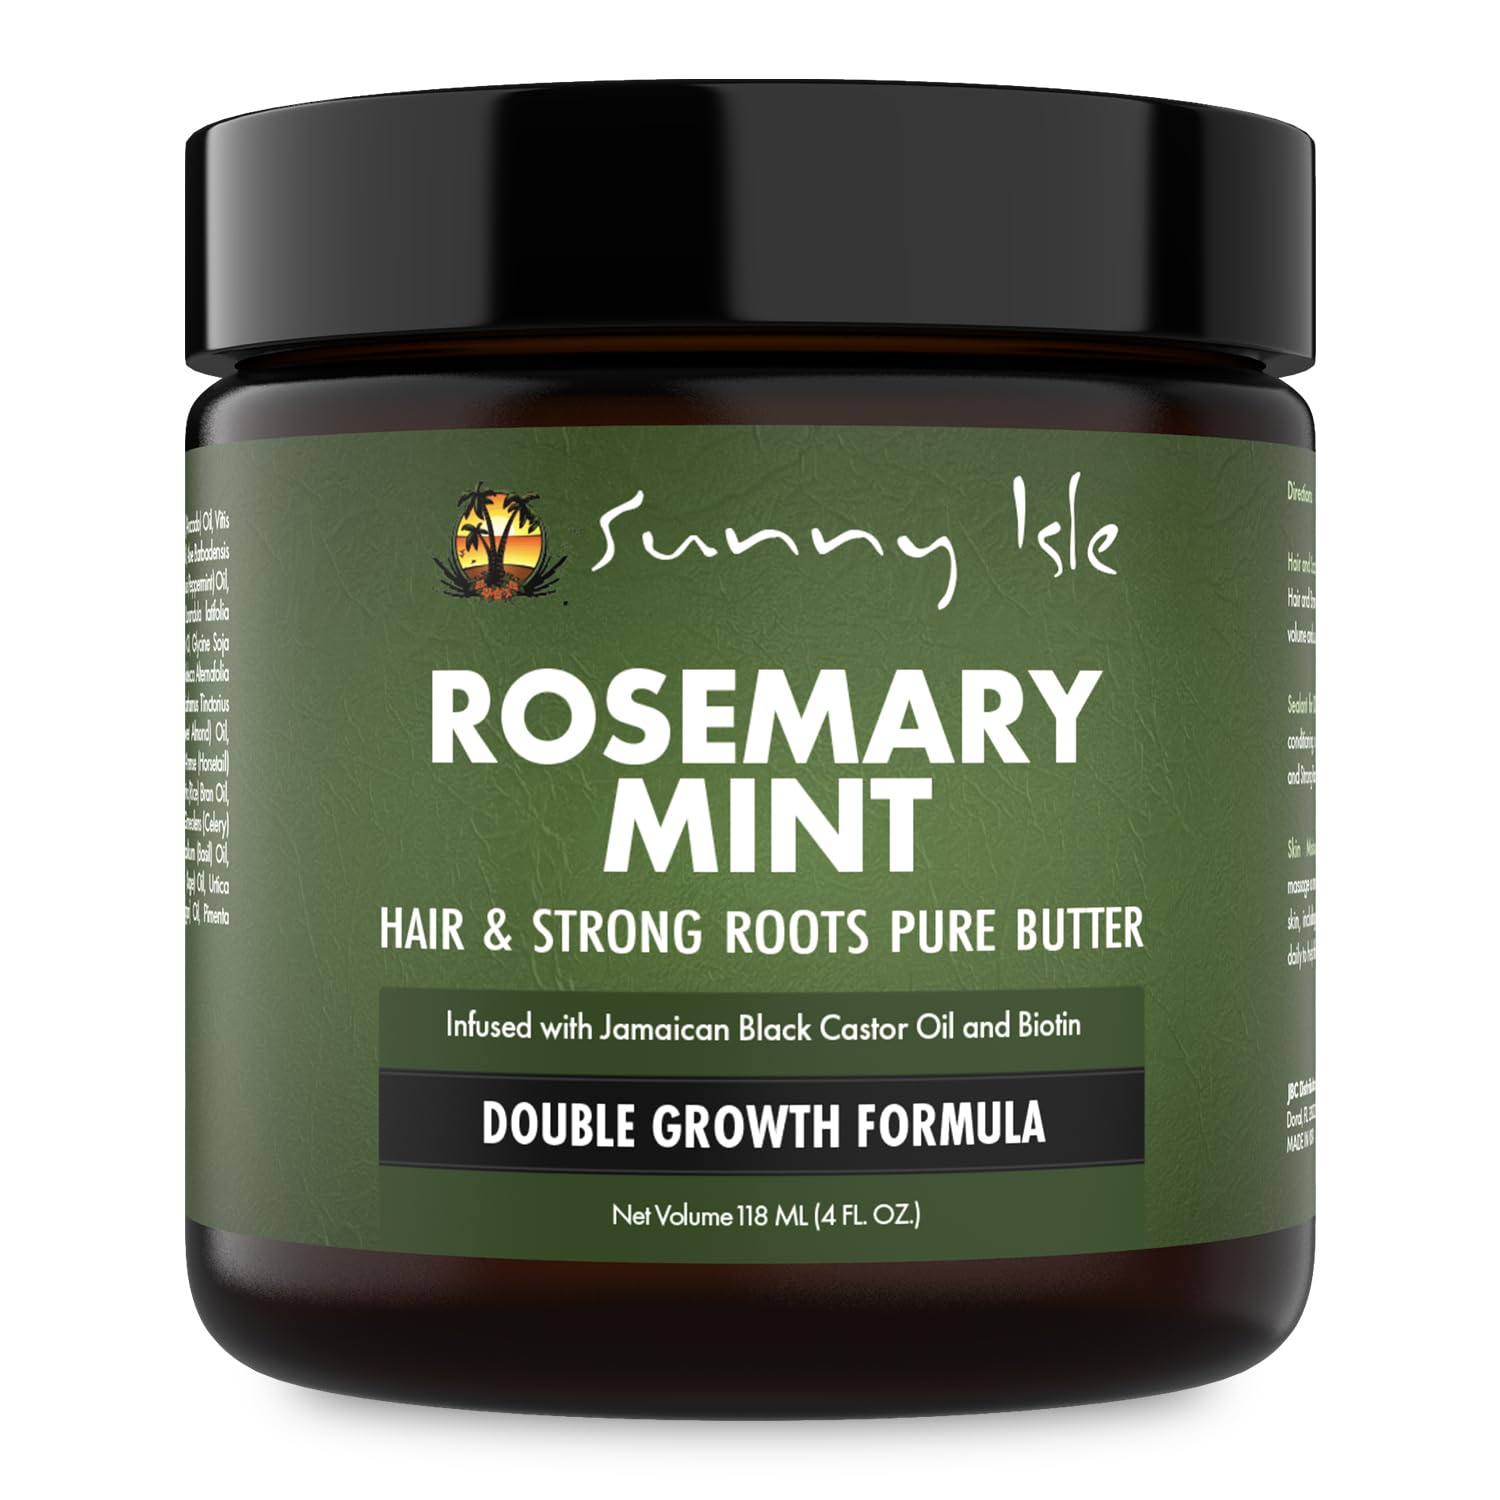 Sunny Isle Rosemary and Mint butter for Strong Hair and Roots, 4 Ounces, Infused with Biotin and Jamaican Black Castor Oil, Strengening and Nourishing Hair Follicles